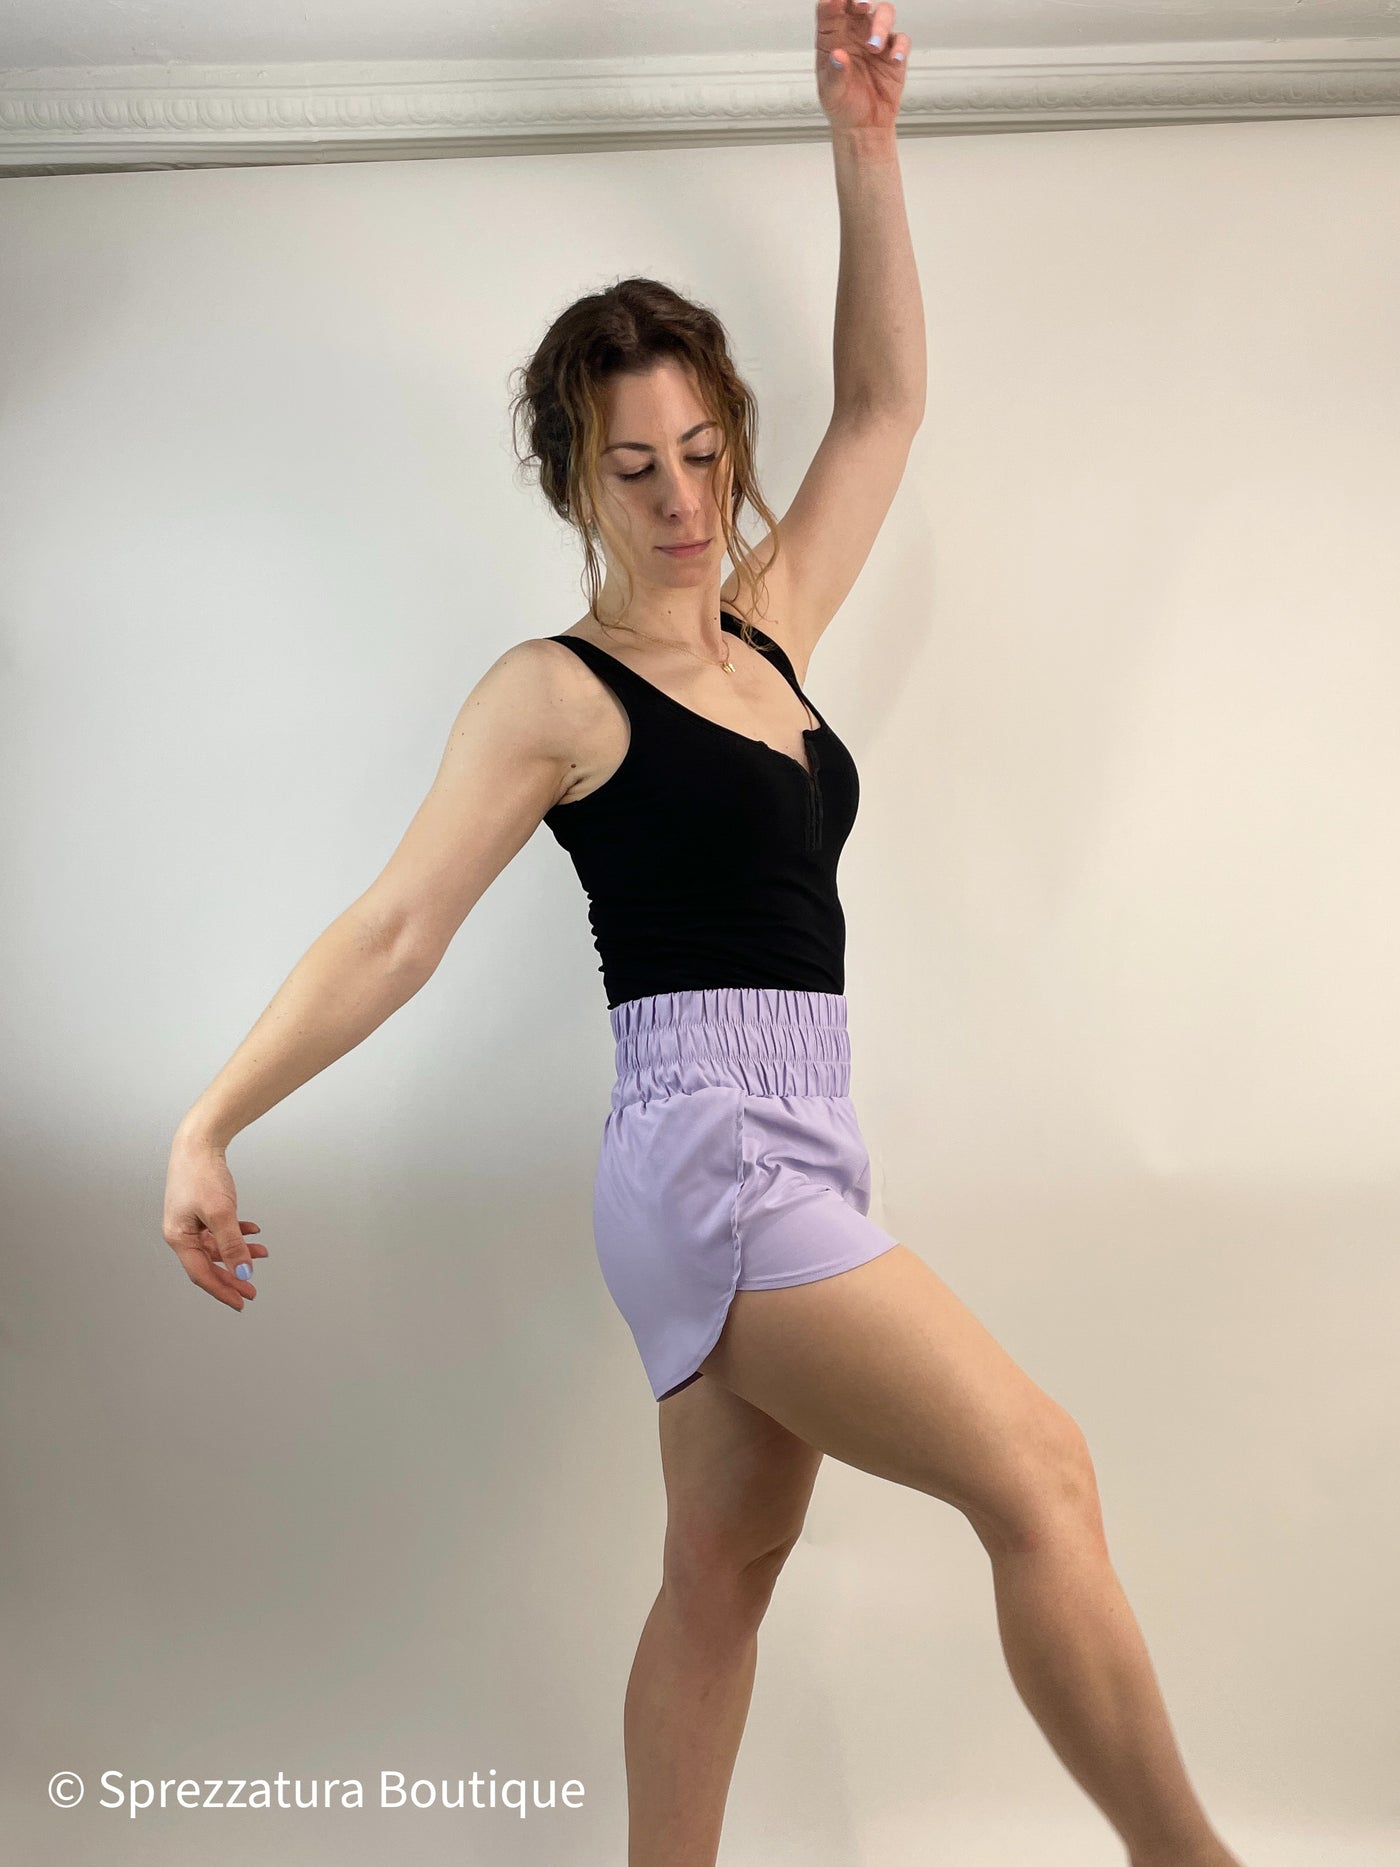 Lilac track shorts. Lightweight super high rise women's shorts for exercise or athleisure casual shorts. Elastic waistband comfortable shorts in lavender. Pastel purple shorts